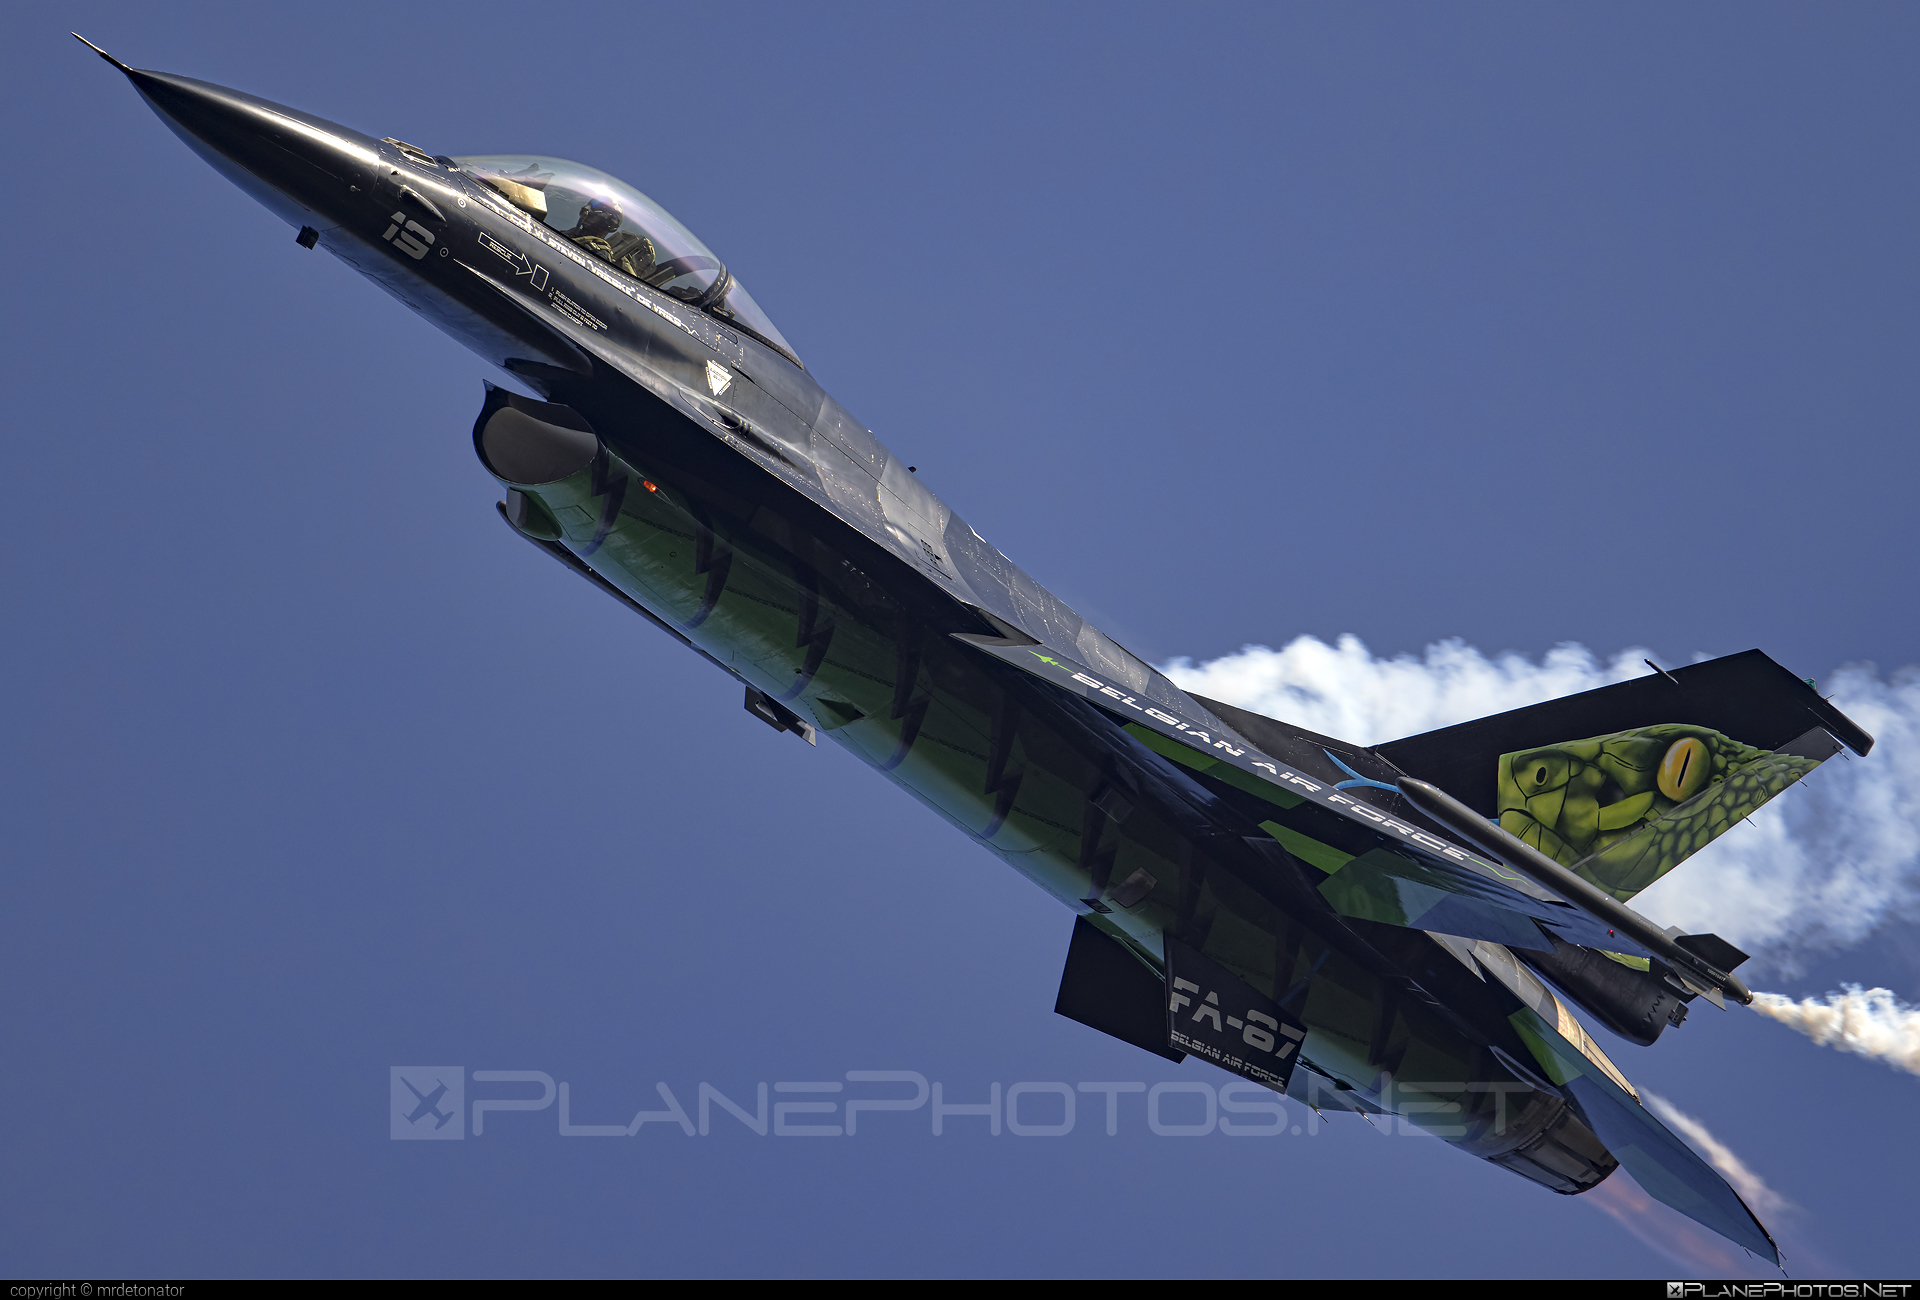 SABCA F-16AM Fighting Falcon - FA-87 operated by Luchtcomponent (Belgian Air Force) #belgianairforce #f16 #f16am #fightingfalcon #luchtcomponent #sabca